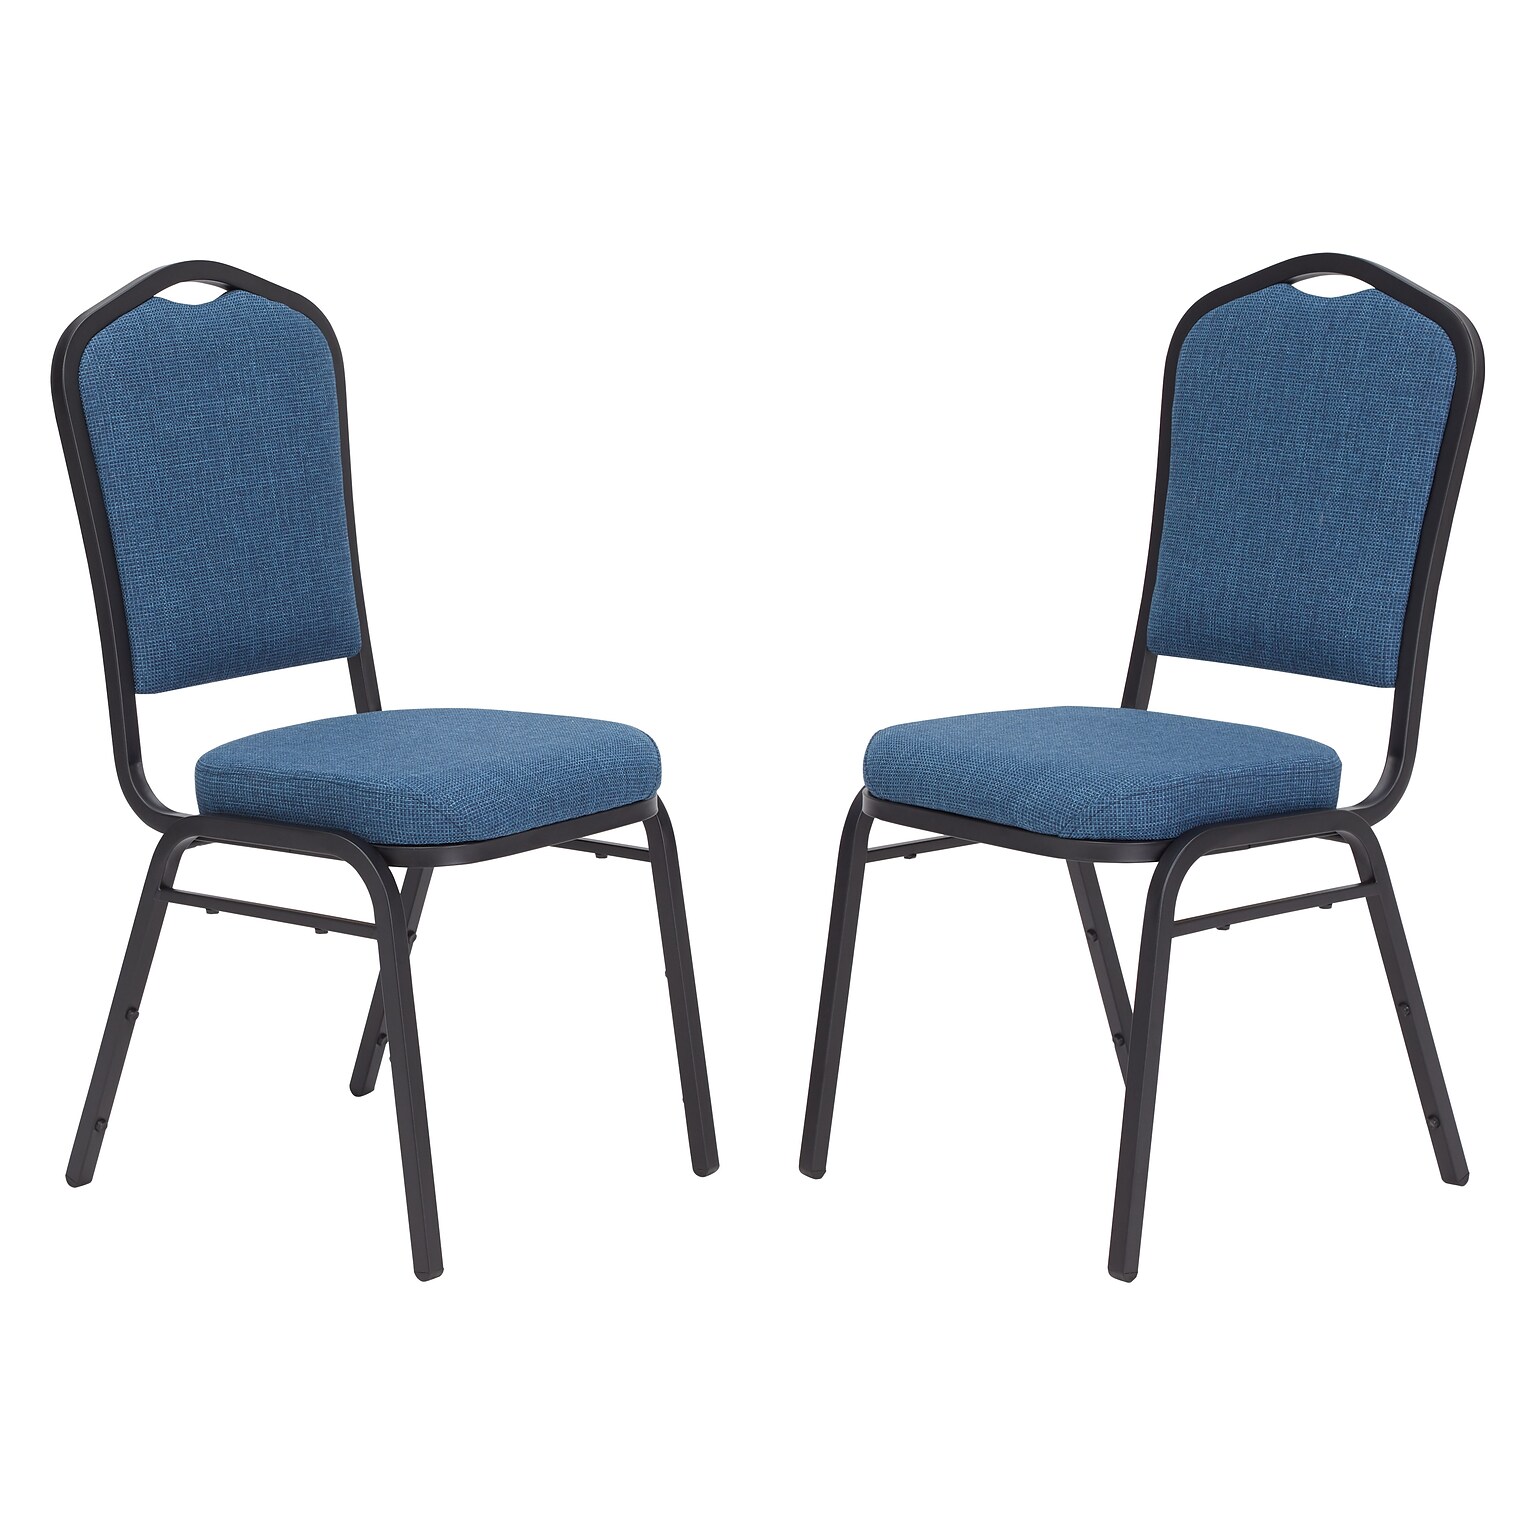 NPS 9300 Series Deluxe Fabric Upholstered Stack Chair, Natural Blue/Black Sandtex, 2 Pack (9374-BT/2)